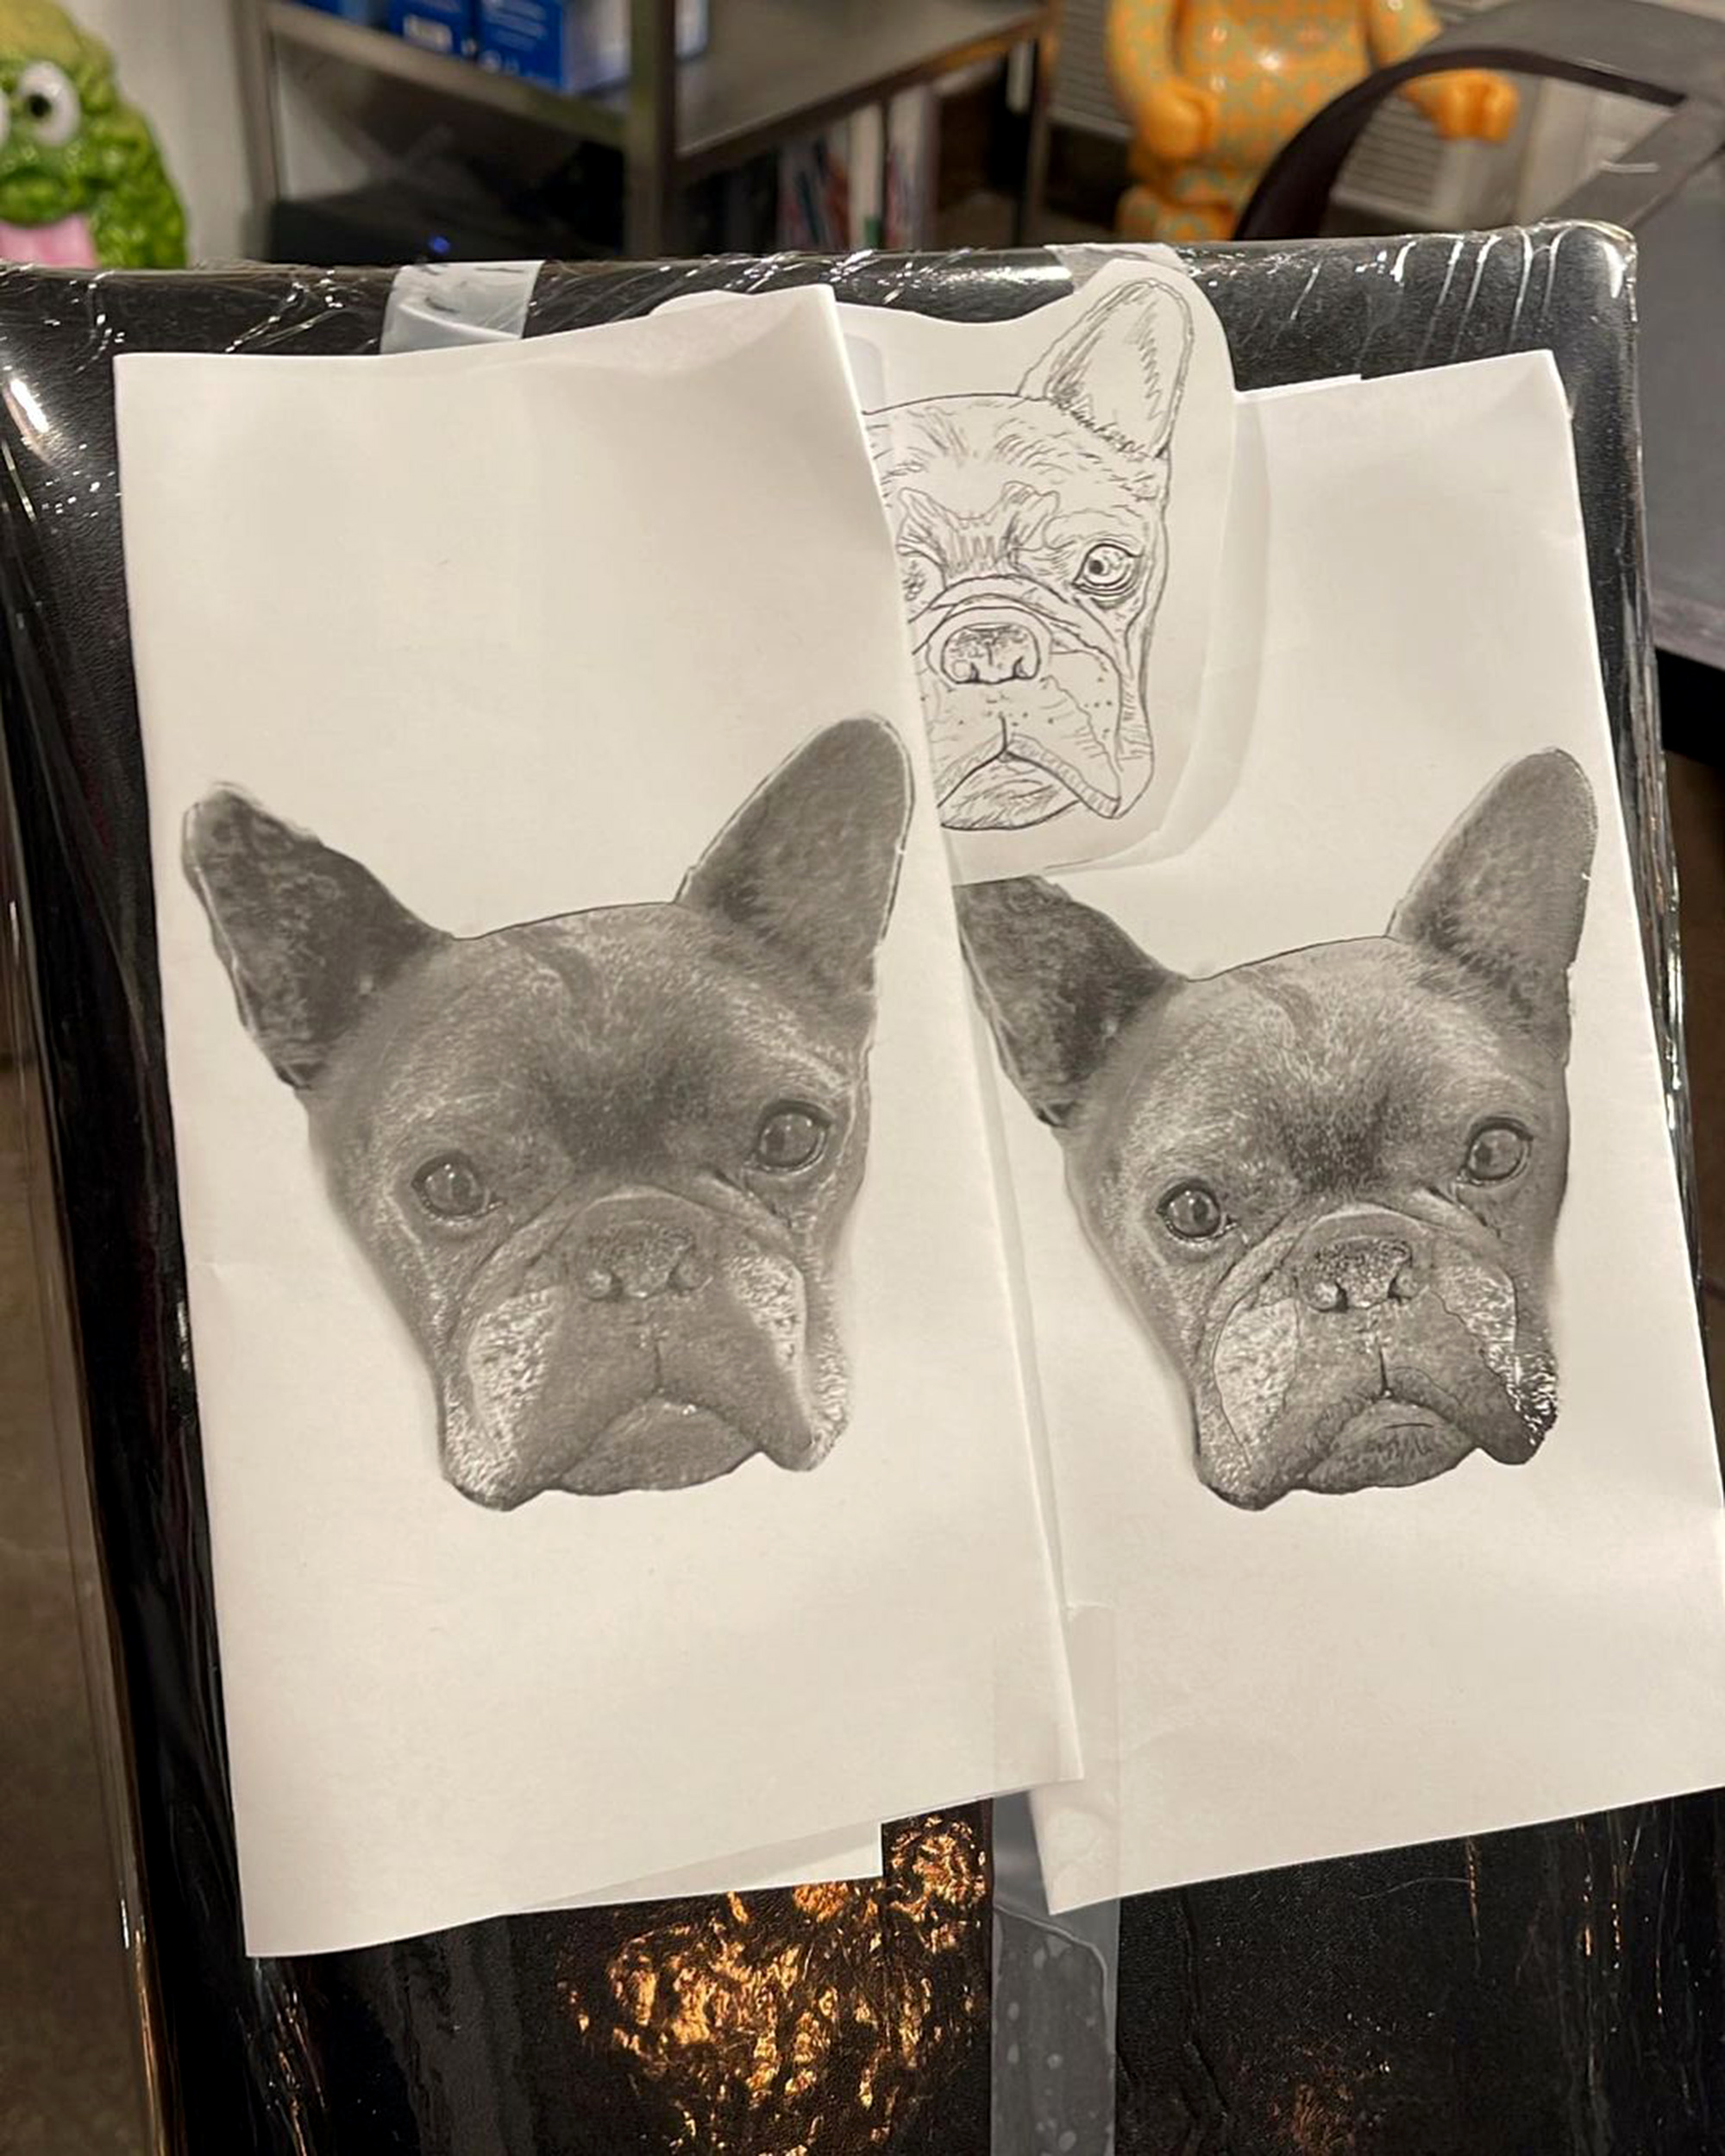 Travis Barker gets a tattoo to memorialize his late dog, Blue the bulldog